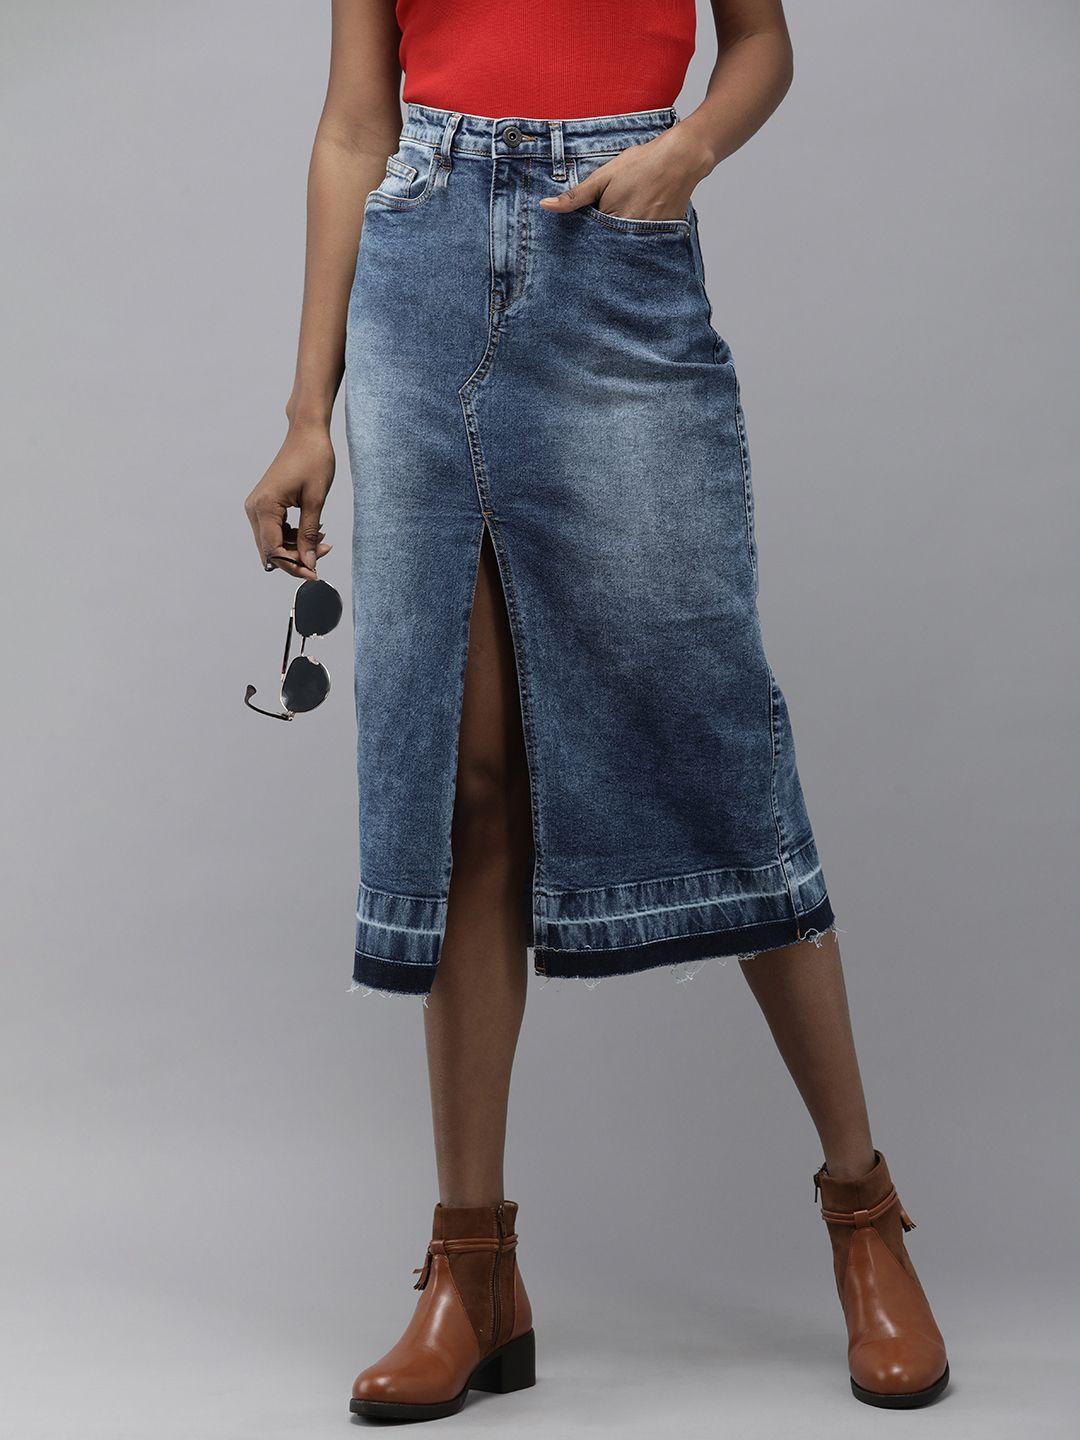 the roadster lifestyle co. mid rise faded denim straight skirt with slit